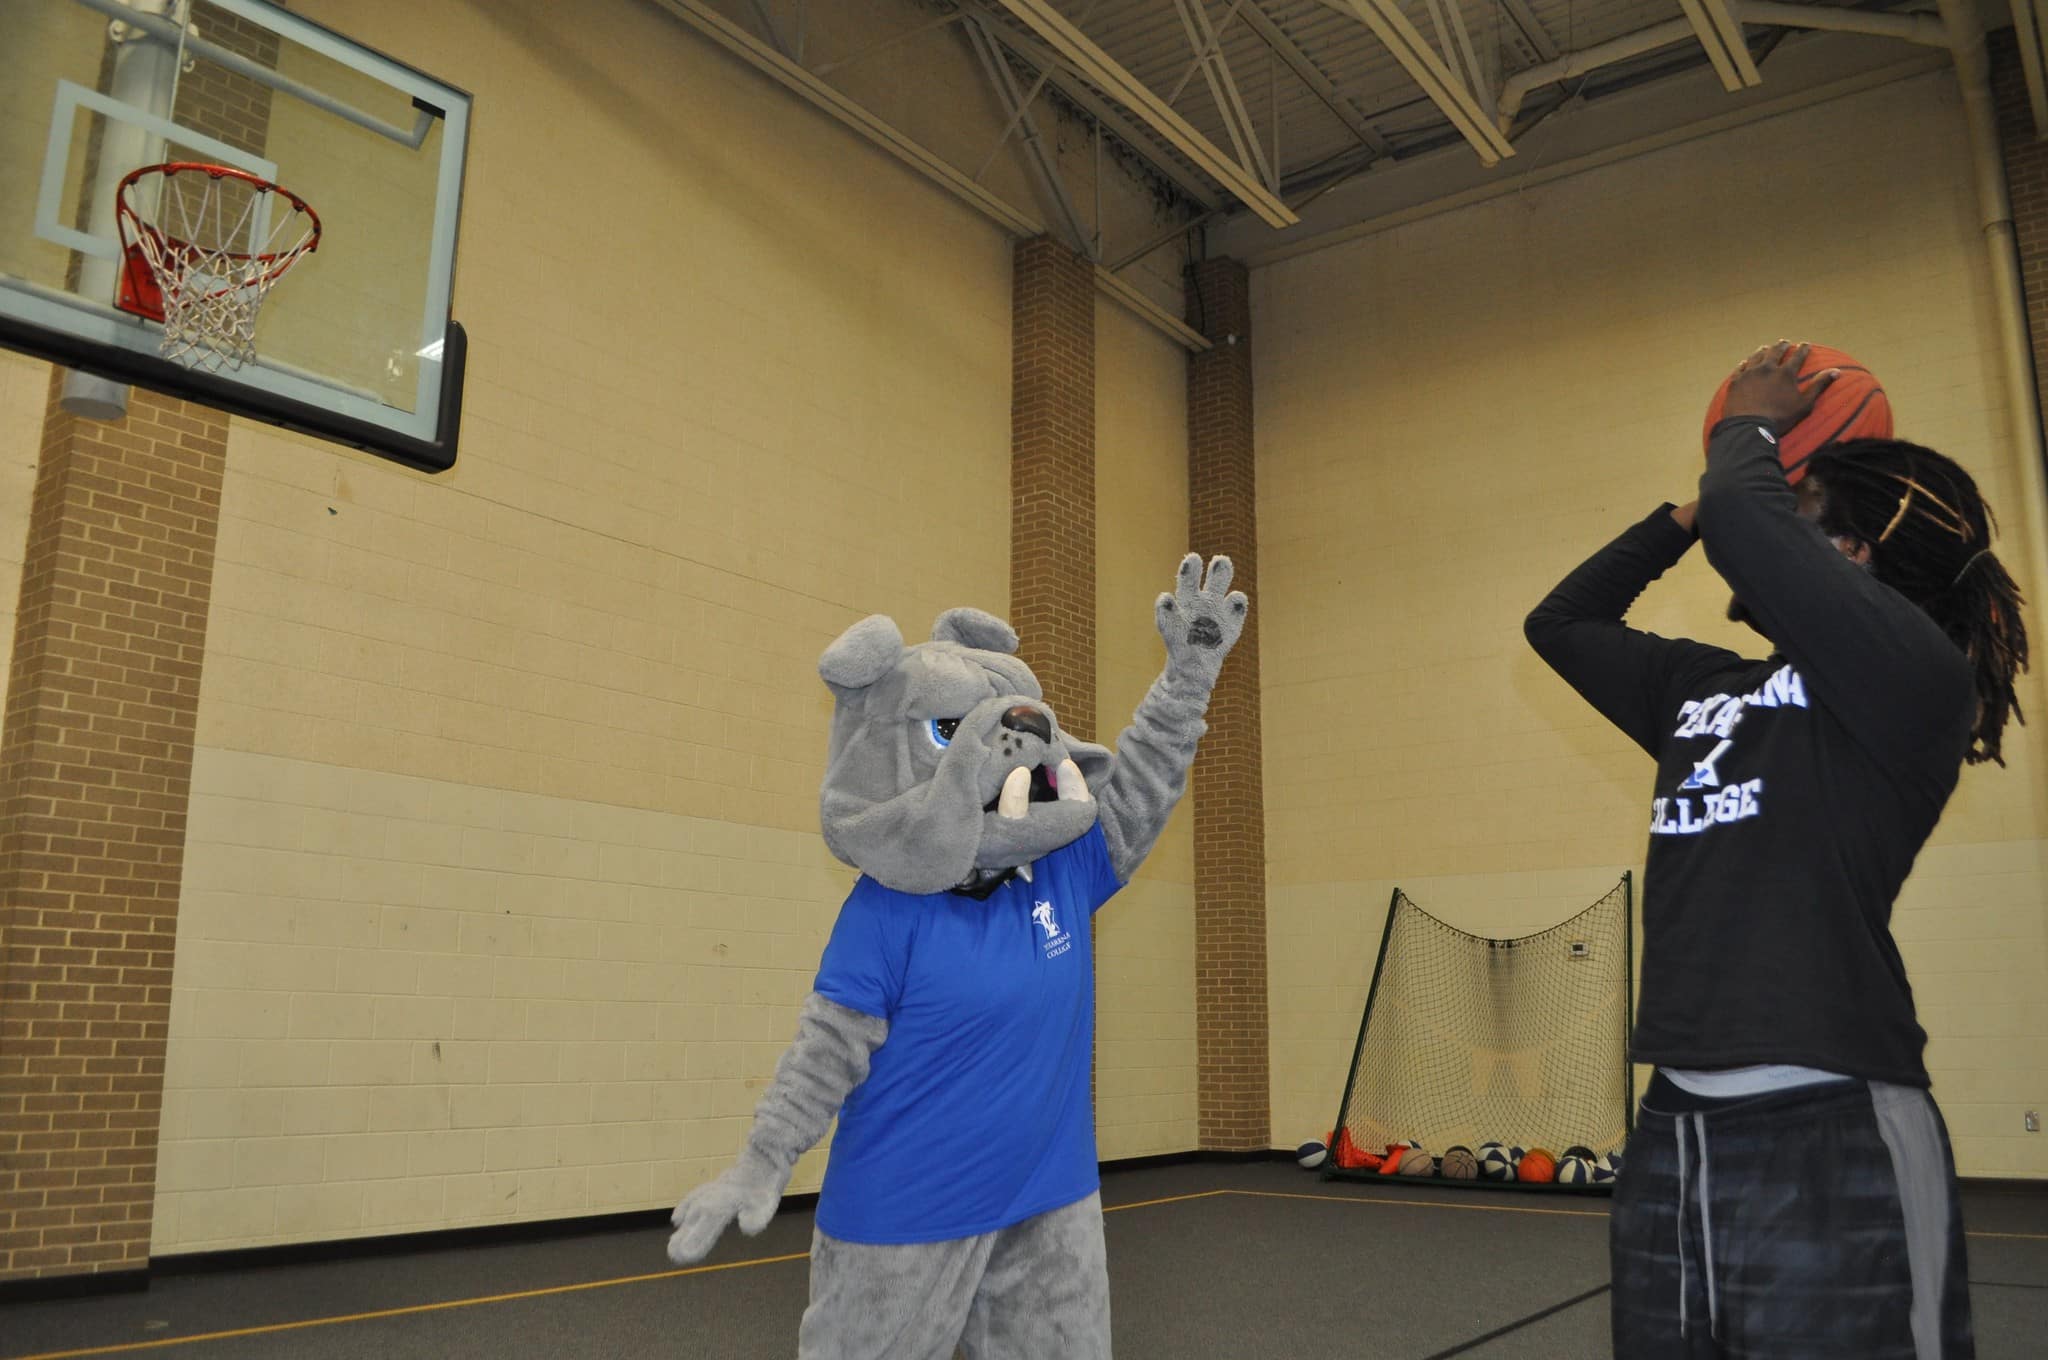 Bo the Bulldog catches some hoops on the basketball floor